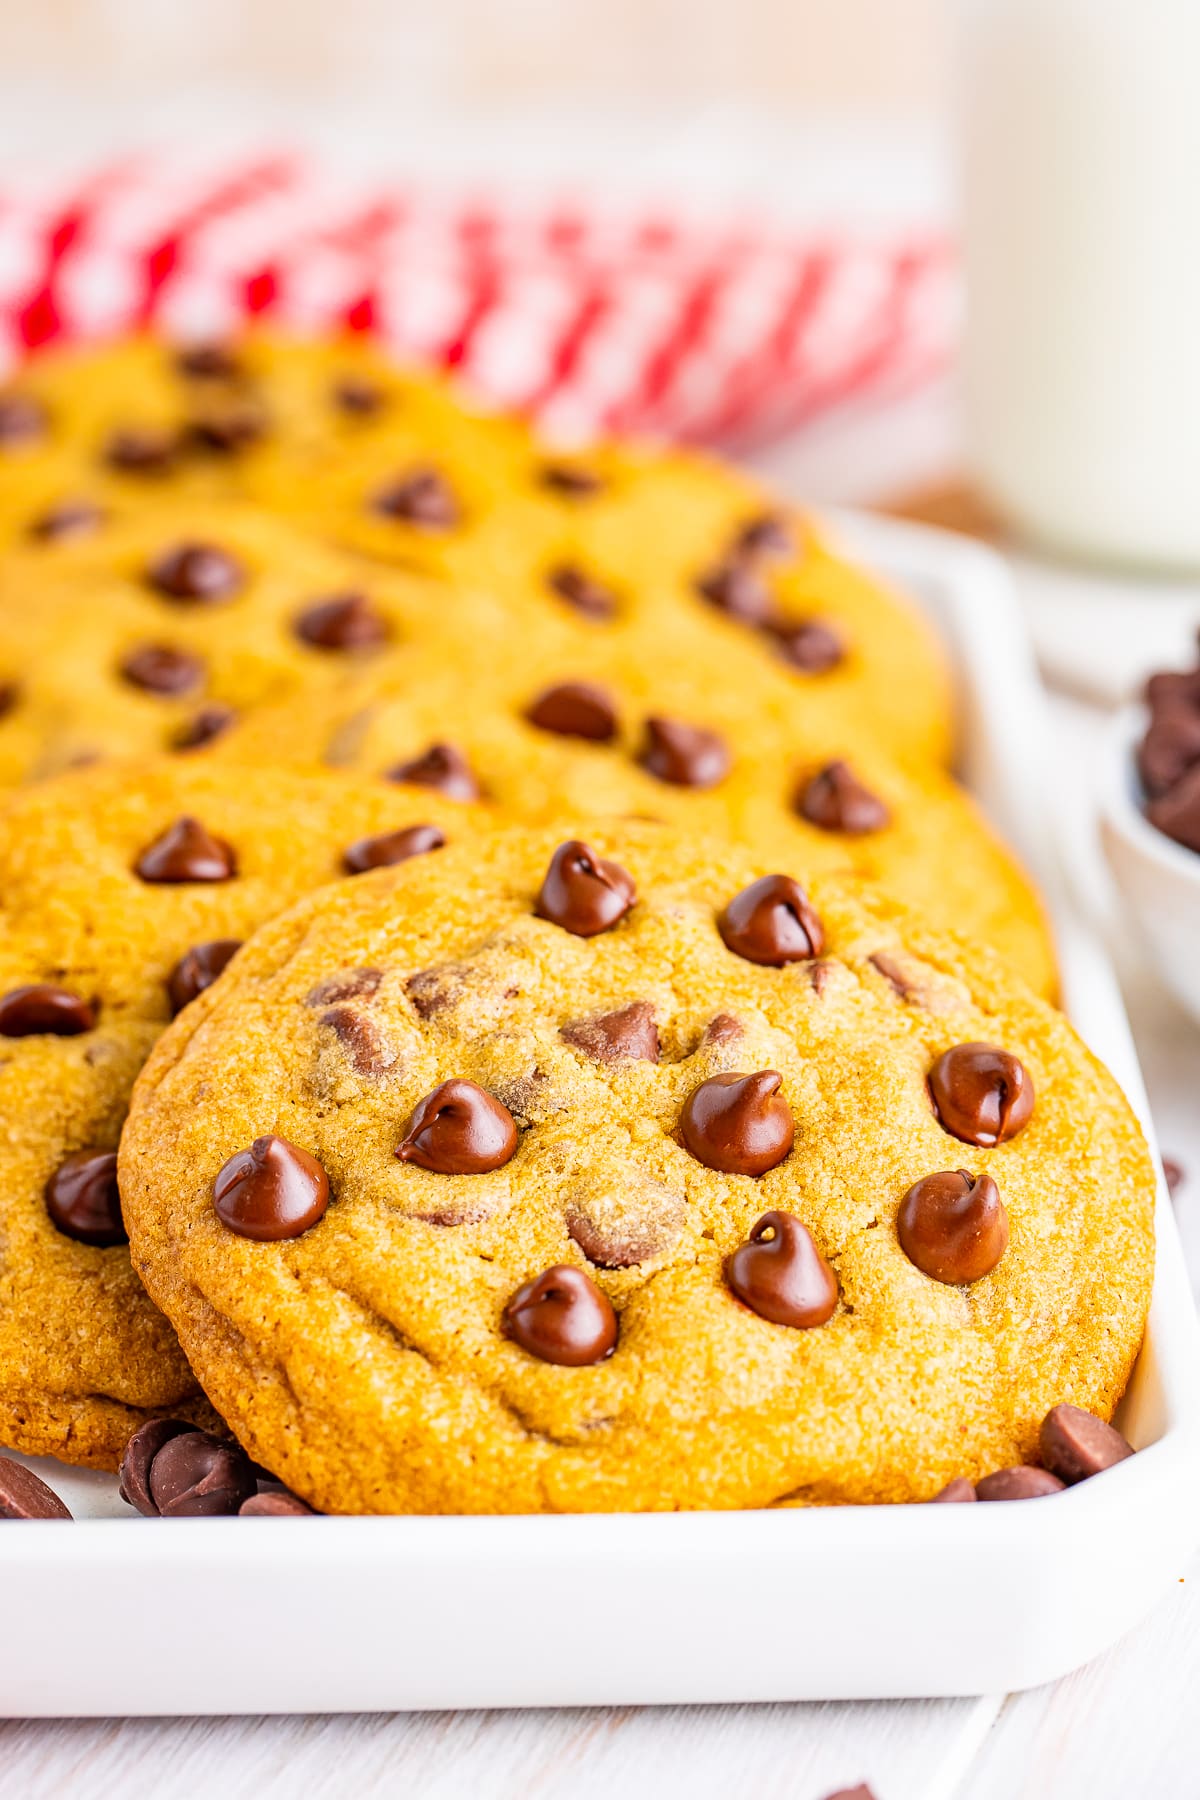 Mrs fields chocolate chip cookies on a white serving platter